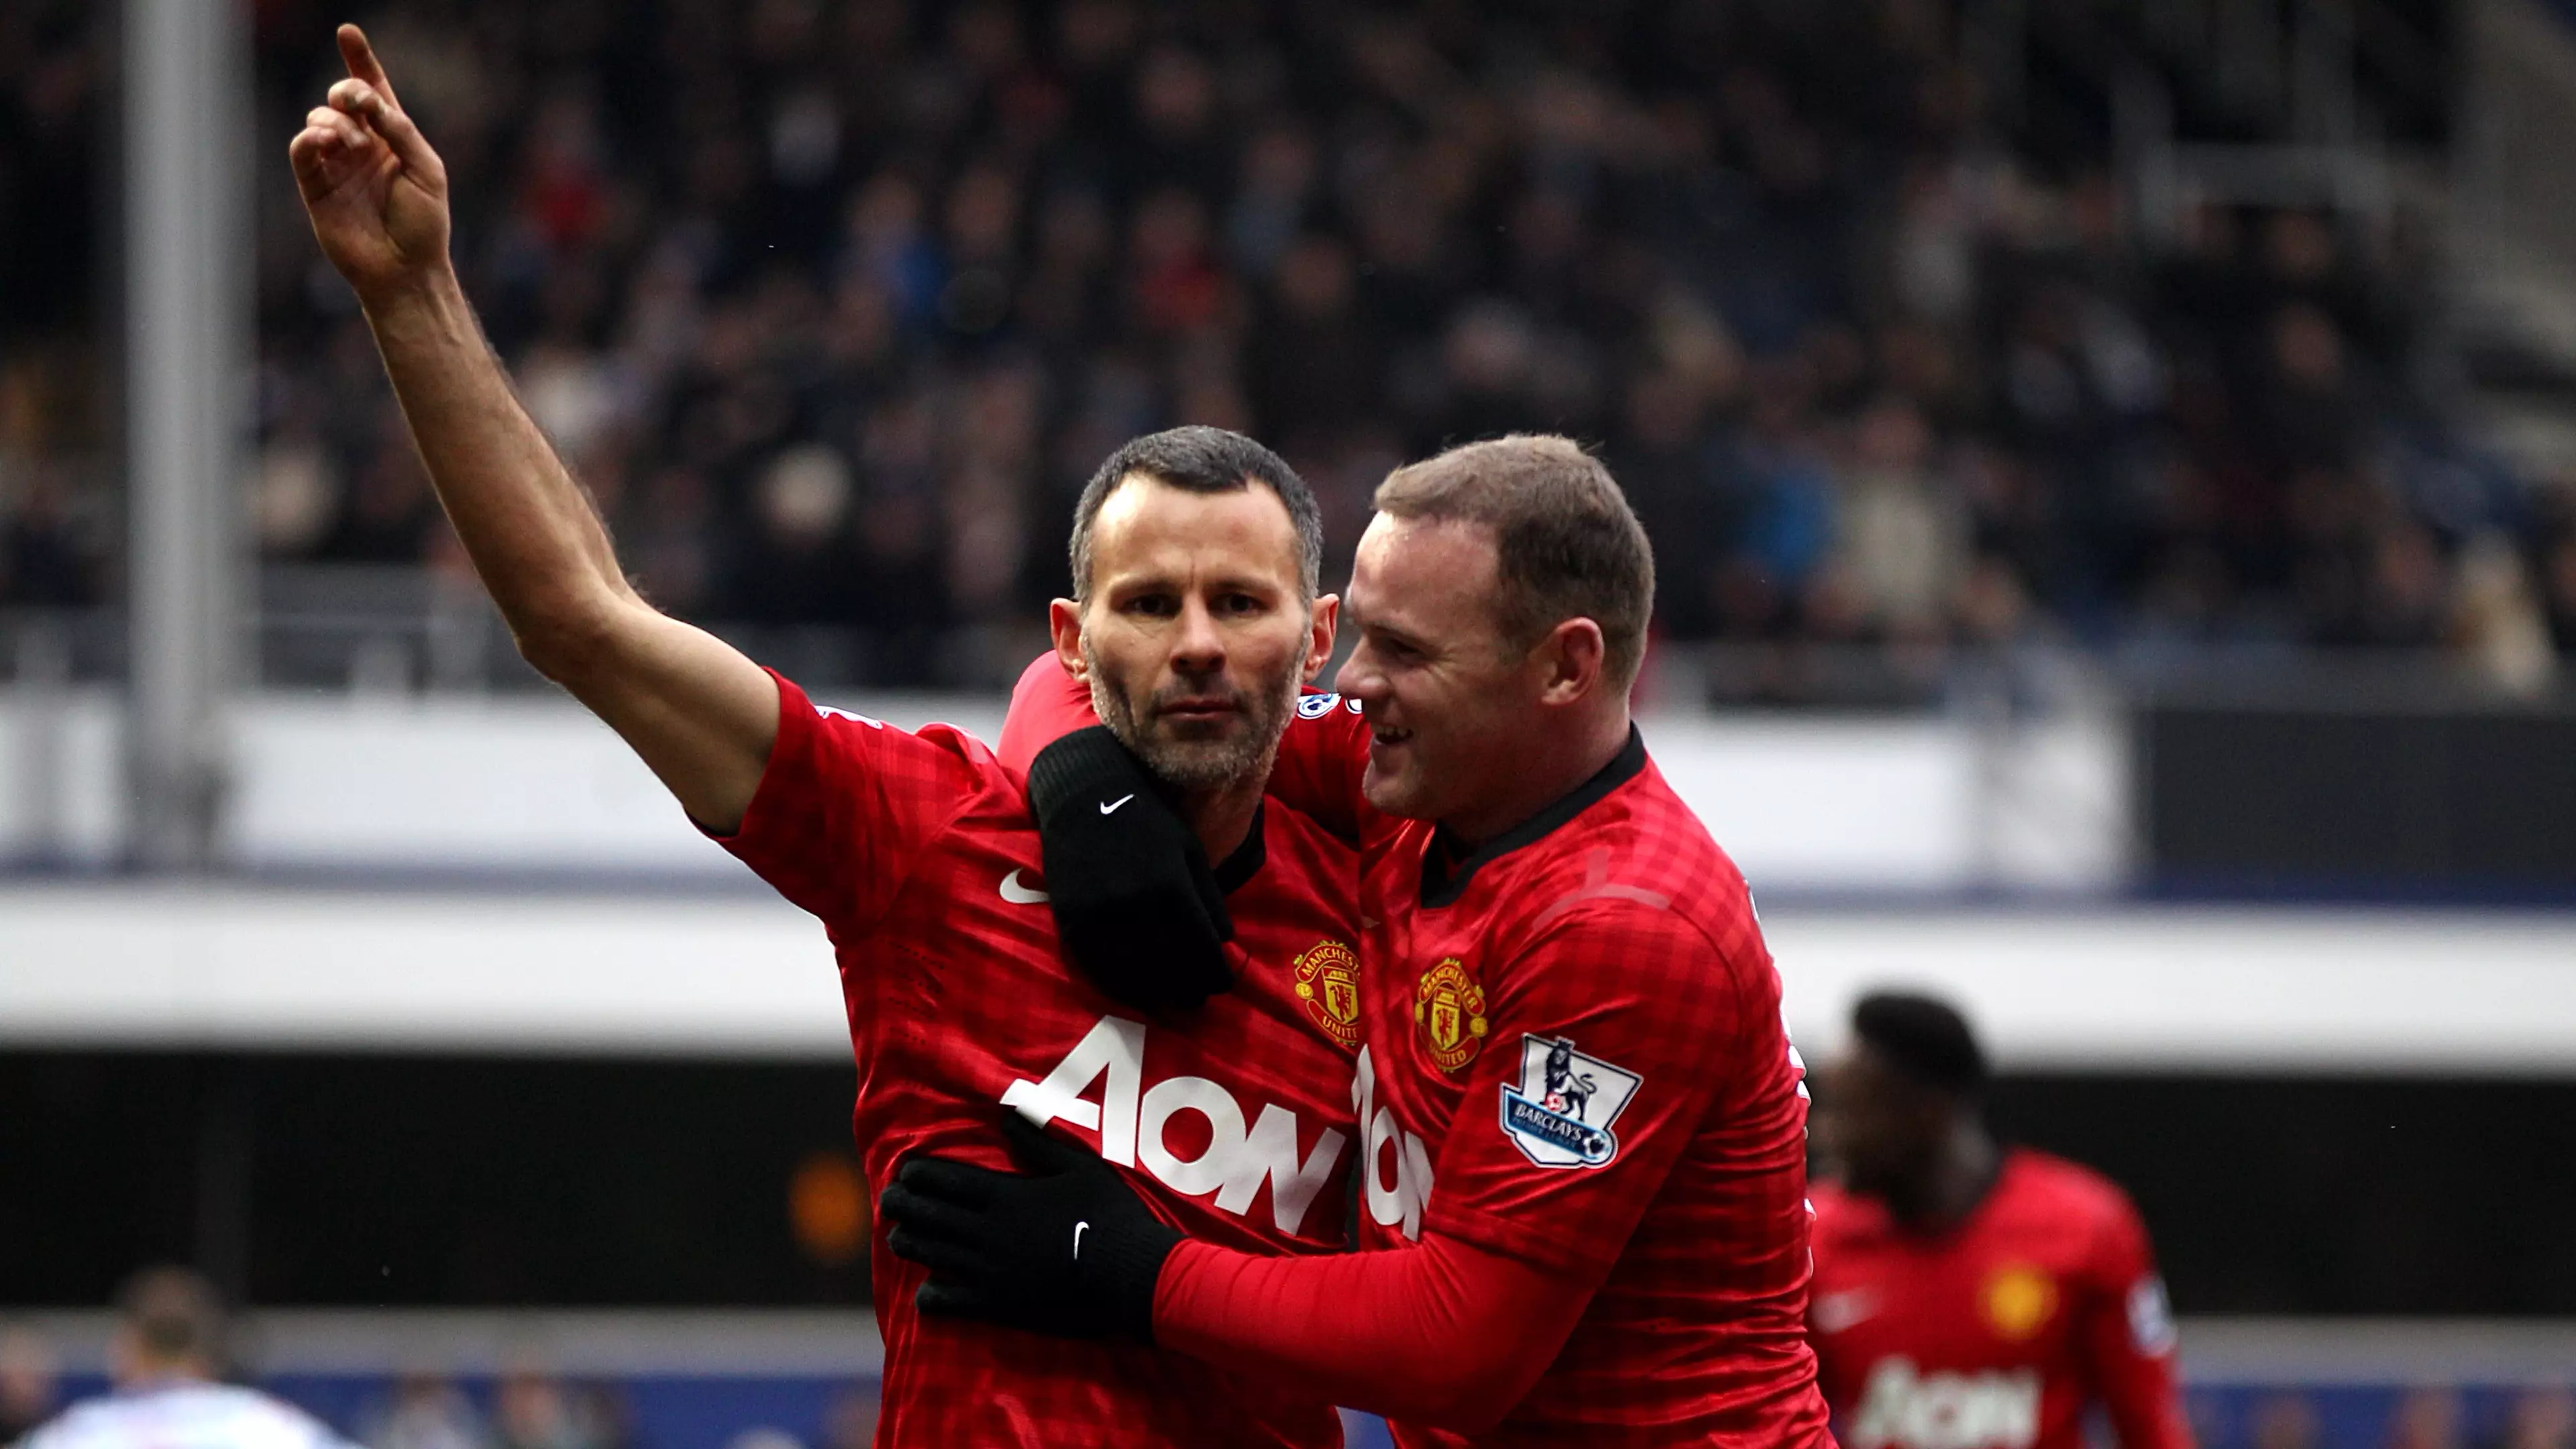 Ryan Giggs Advises What Wayne Rooney Should Do If He Scores Against United